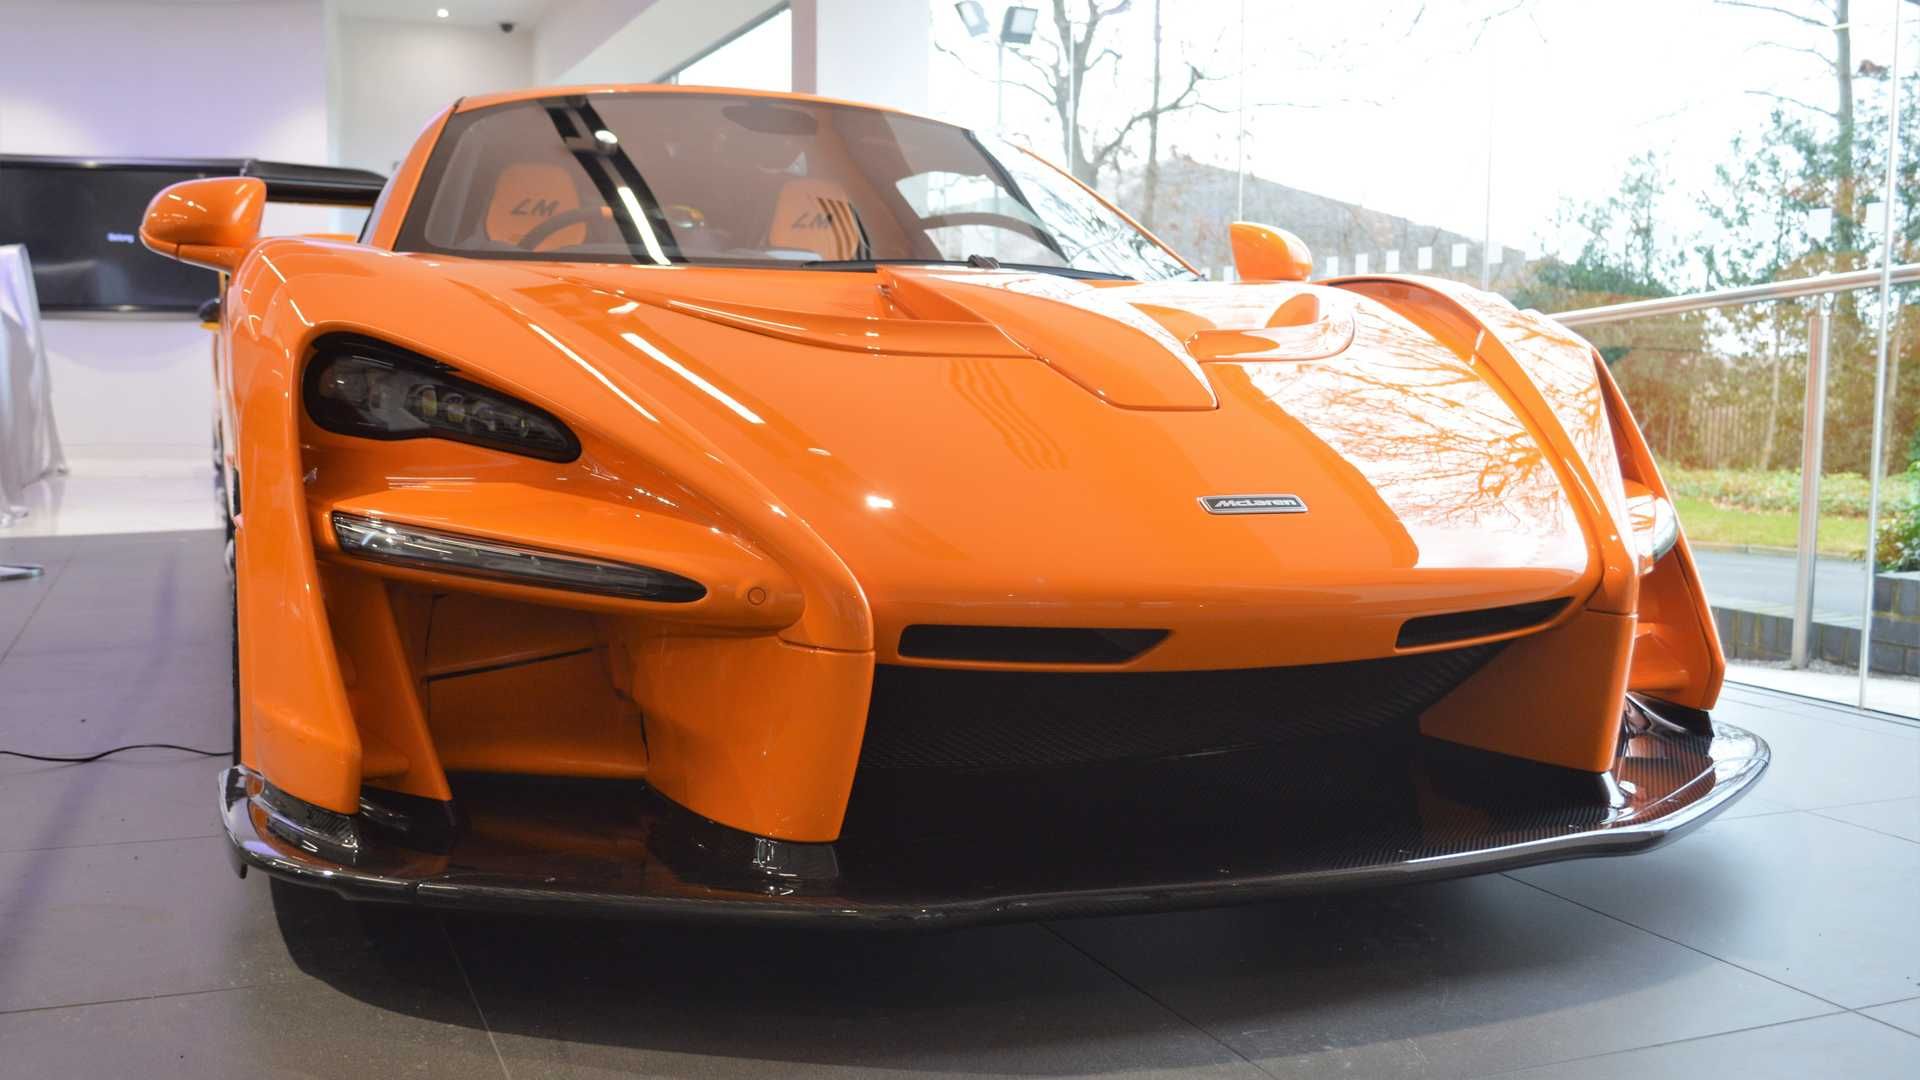 This '90s inspired McLaren Senna LM is the perfect Throwback Thursday